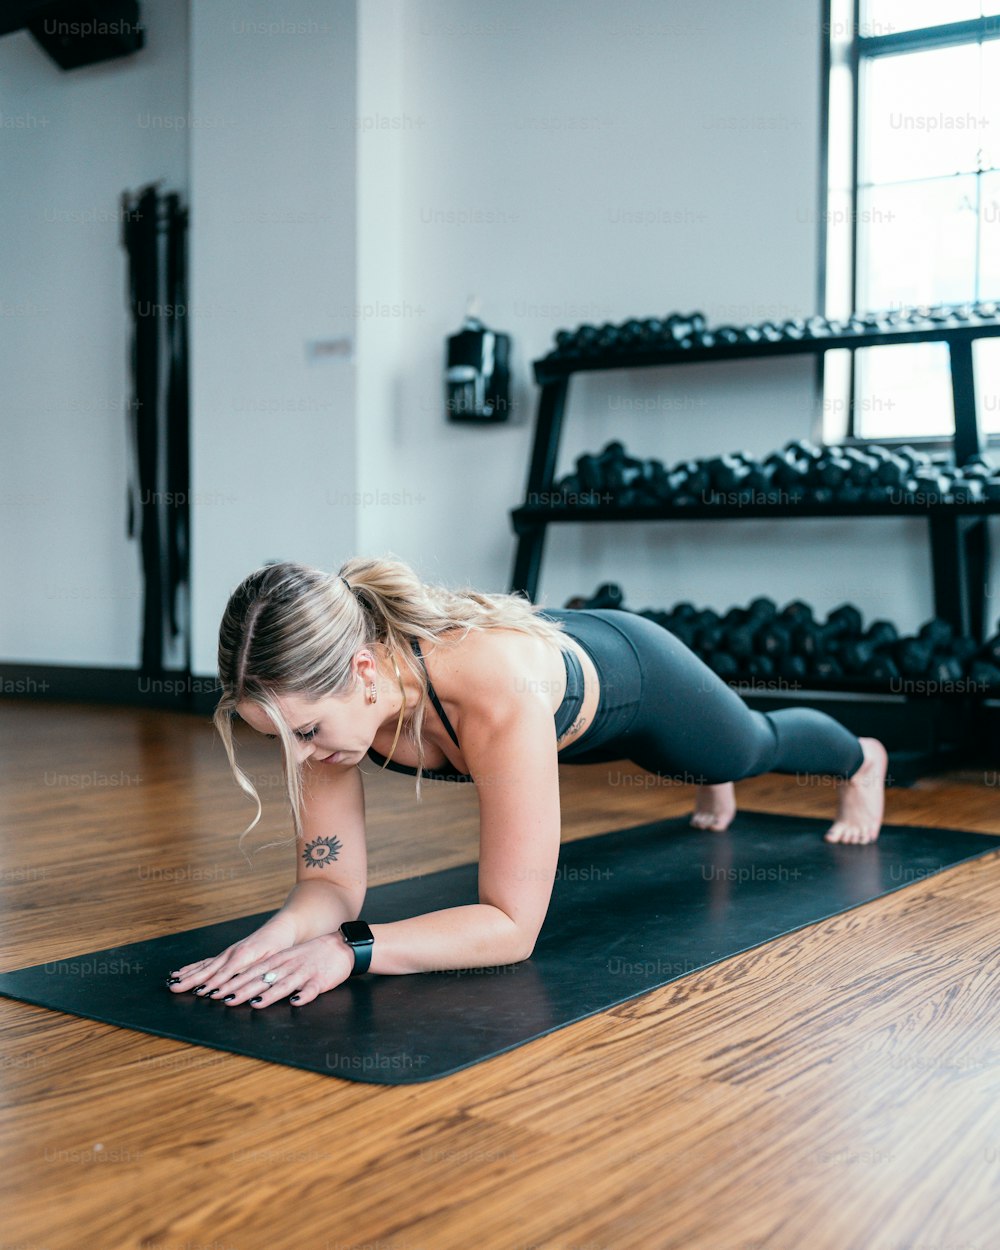 a woman is doing a push up on a yoga mat